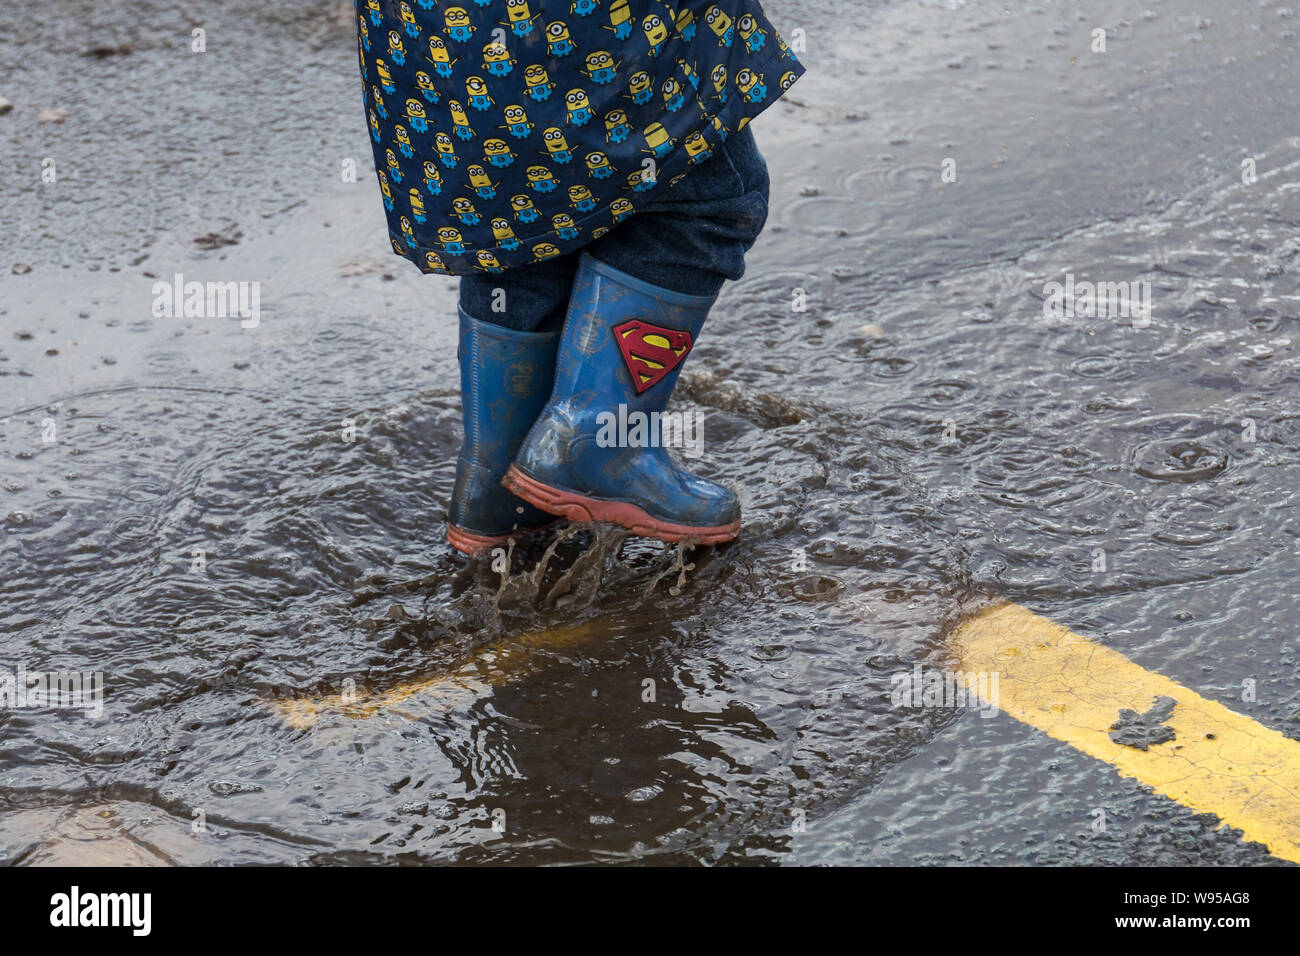 Kid in rain boots jumping in a puddle Stock Photo